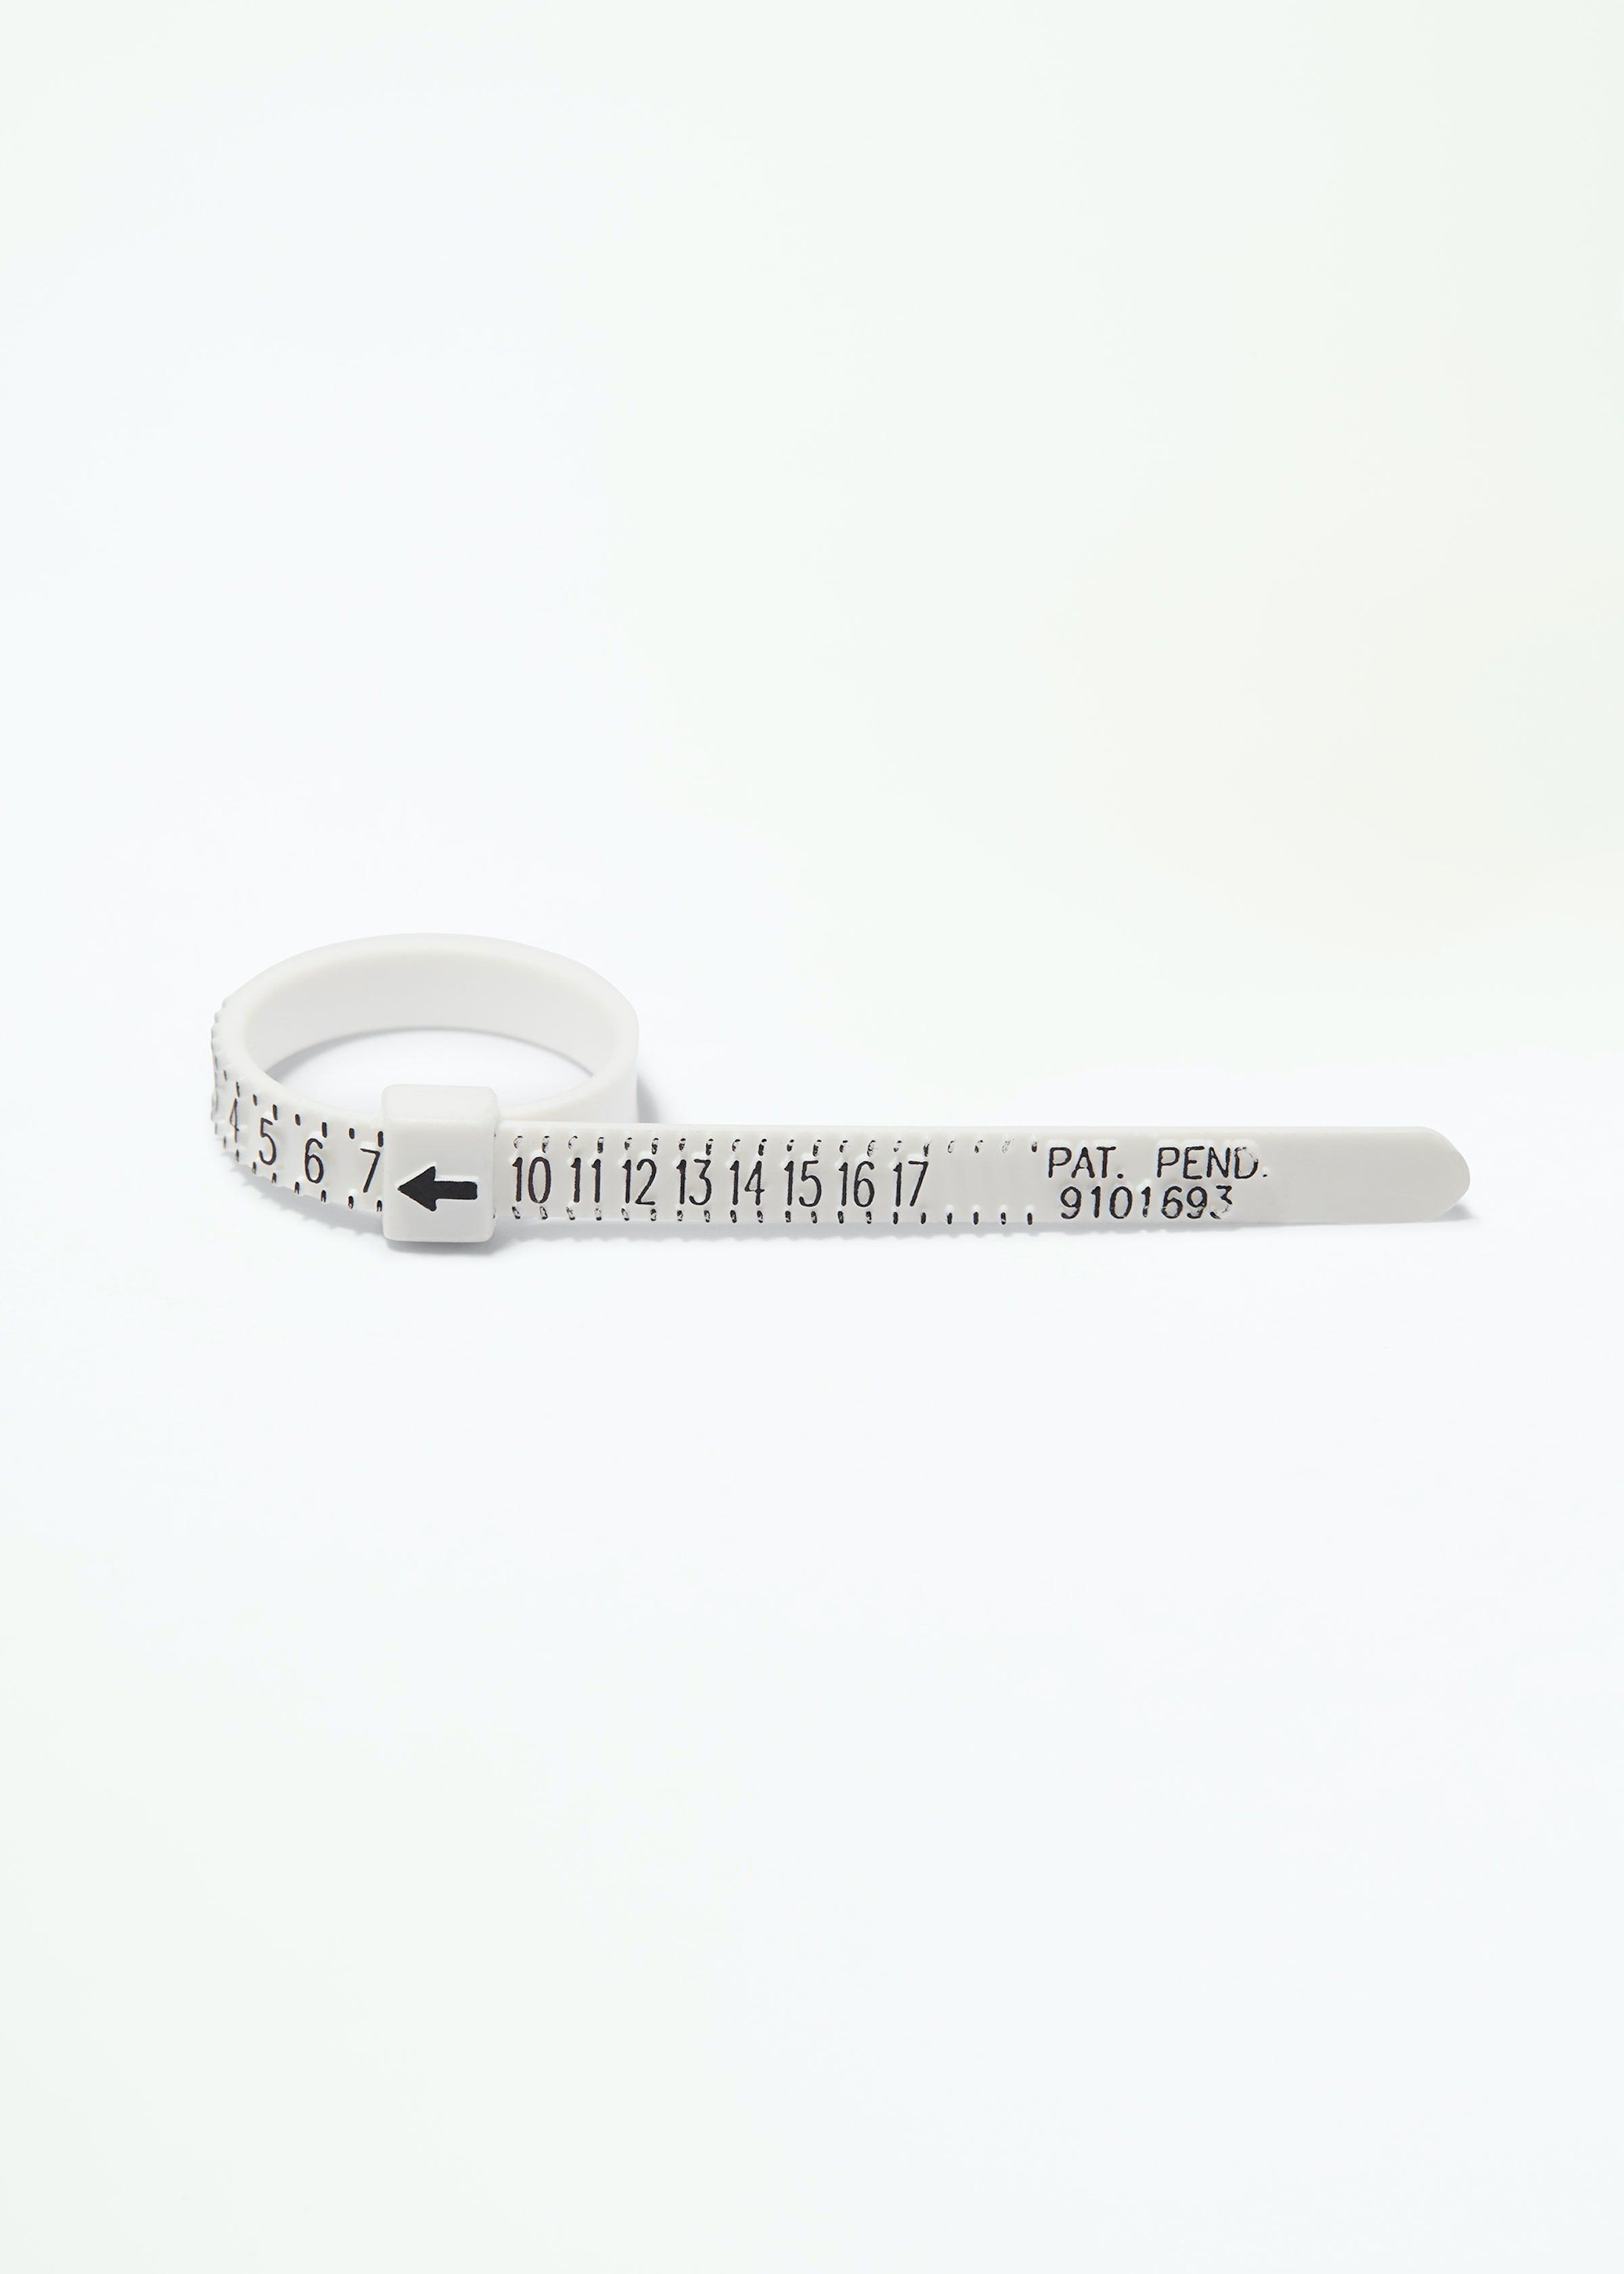 Retail Jewelry Ring Sizer Tool US Size Plastic Ring Measuring Template  Convenient Ring Finger Sizer Gauges 2 13 From Jltrading, $3.53